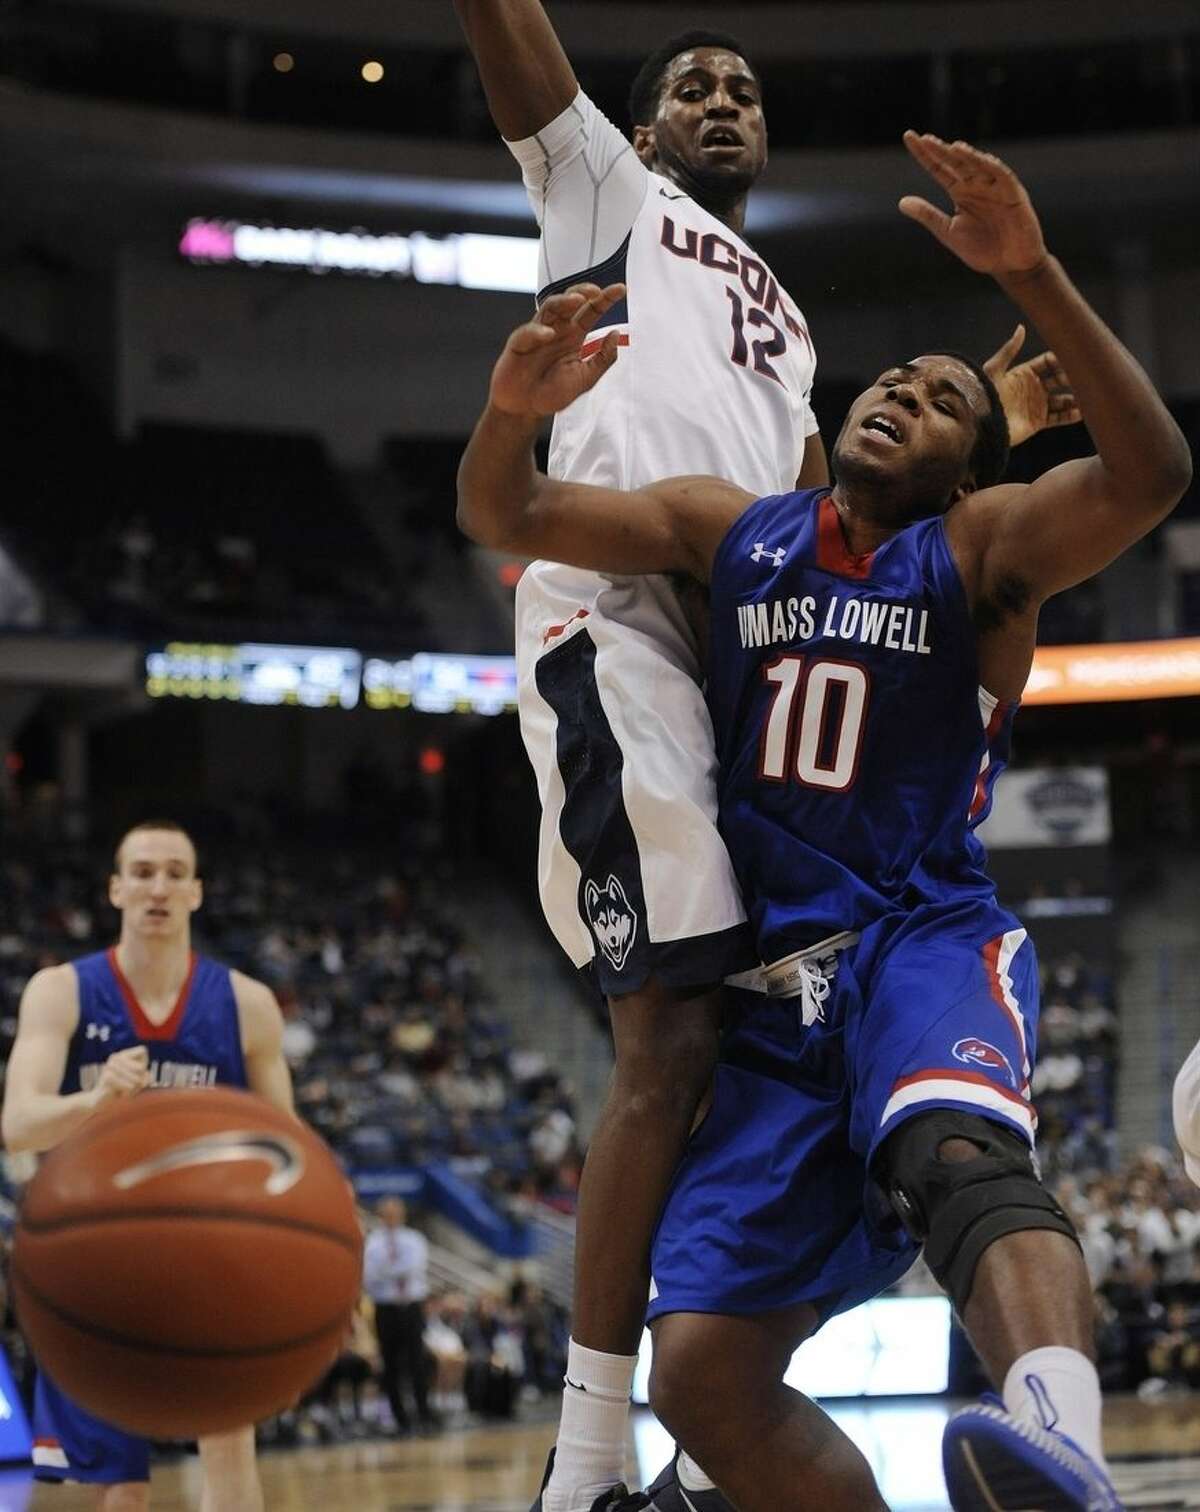 Connecticut's Kentan Facey, left, and UMass-Lowell’s Jahad Thomas, collide in the first half of an NCAA college basketball game, Sunday, Dec. 20, 2015, in Hartford, Conn. (AP Photo/Jessica Hill)